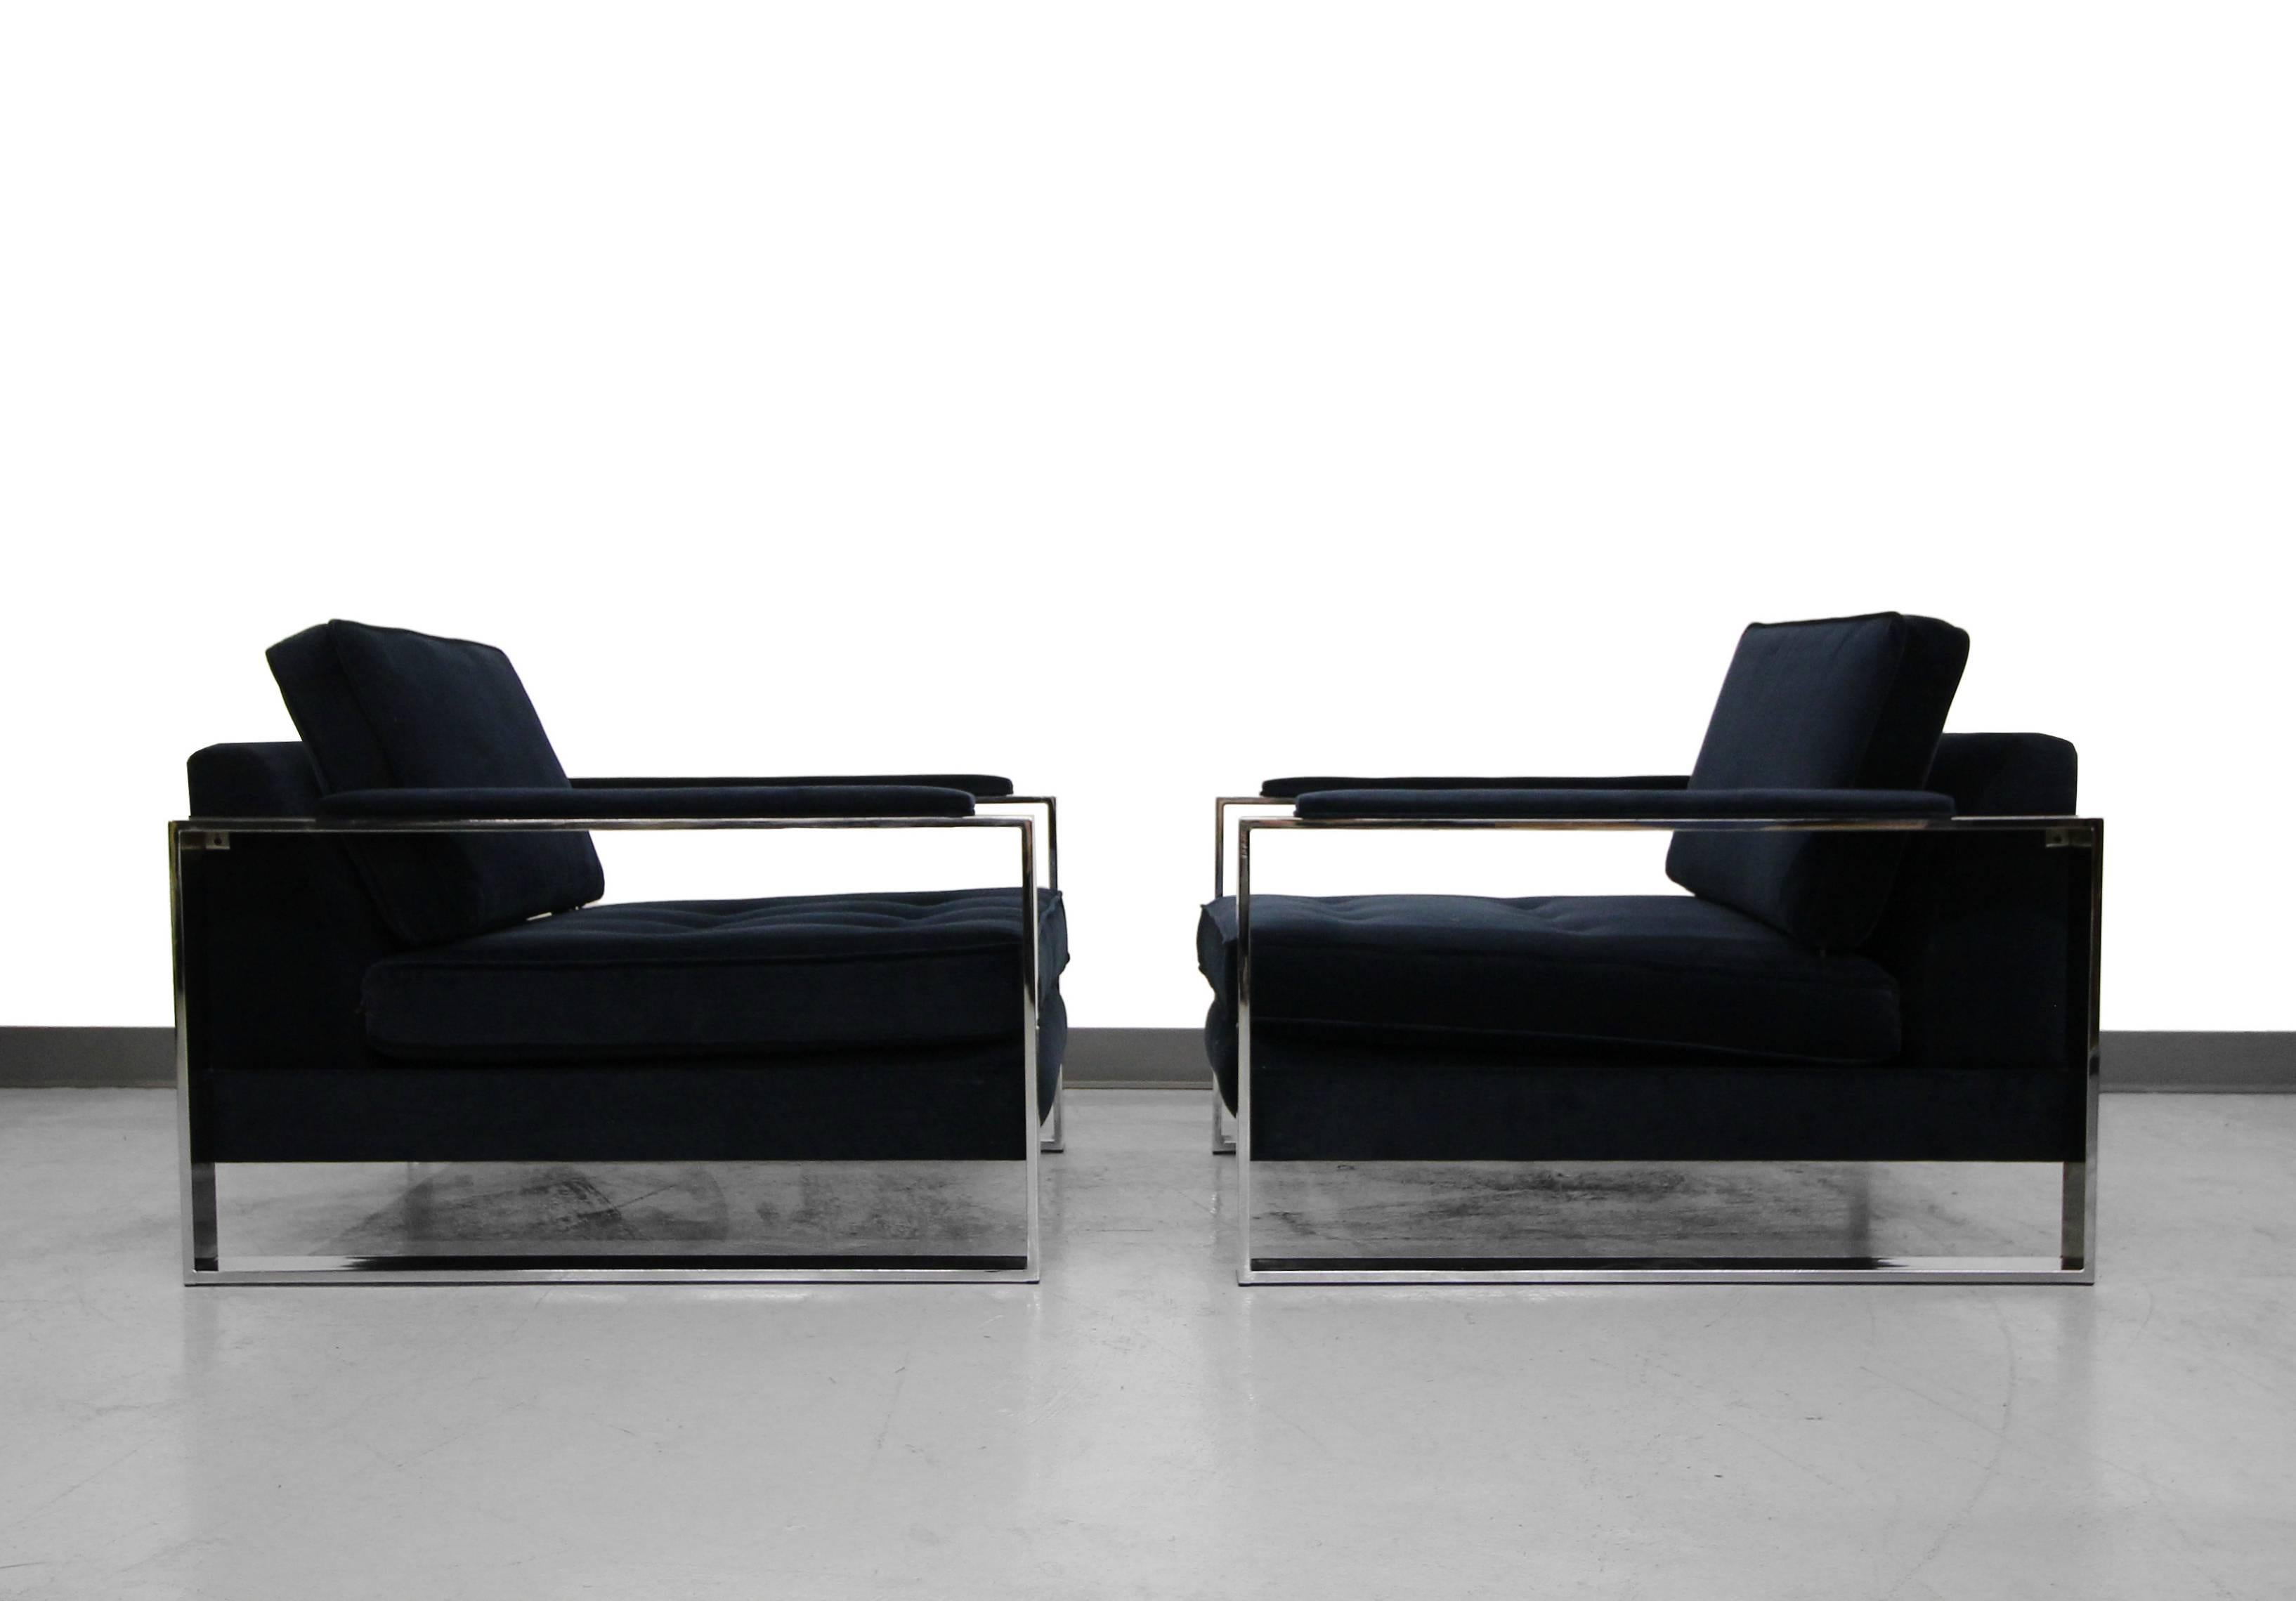 A perfect pair of oversized chrome Mid-Century lounge chairs by Milo Baughman. Floating on mirrored chrome frames and dressed in a dark navy crushed velvet, this pair is a handsome duo.

Matching sofa also available in a separate listing, see last